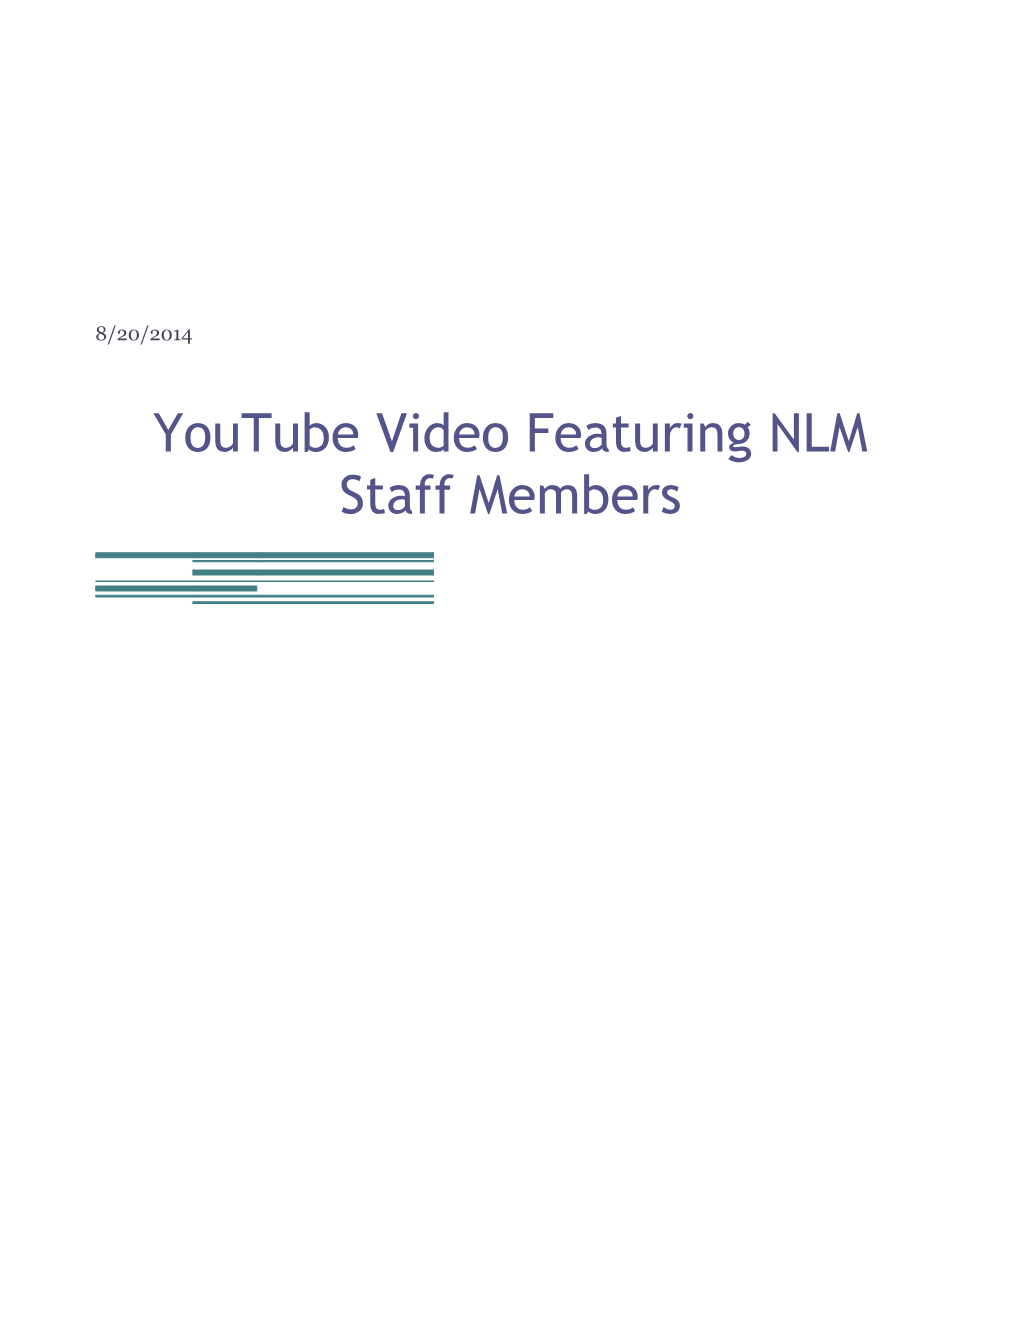 Youtube Video Featuring NLM Staff Members